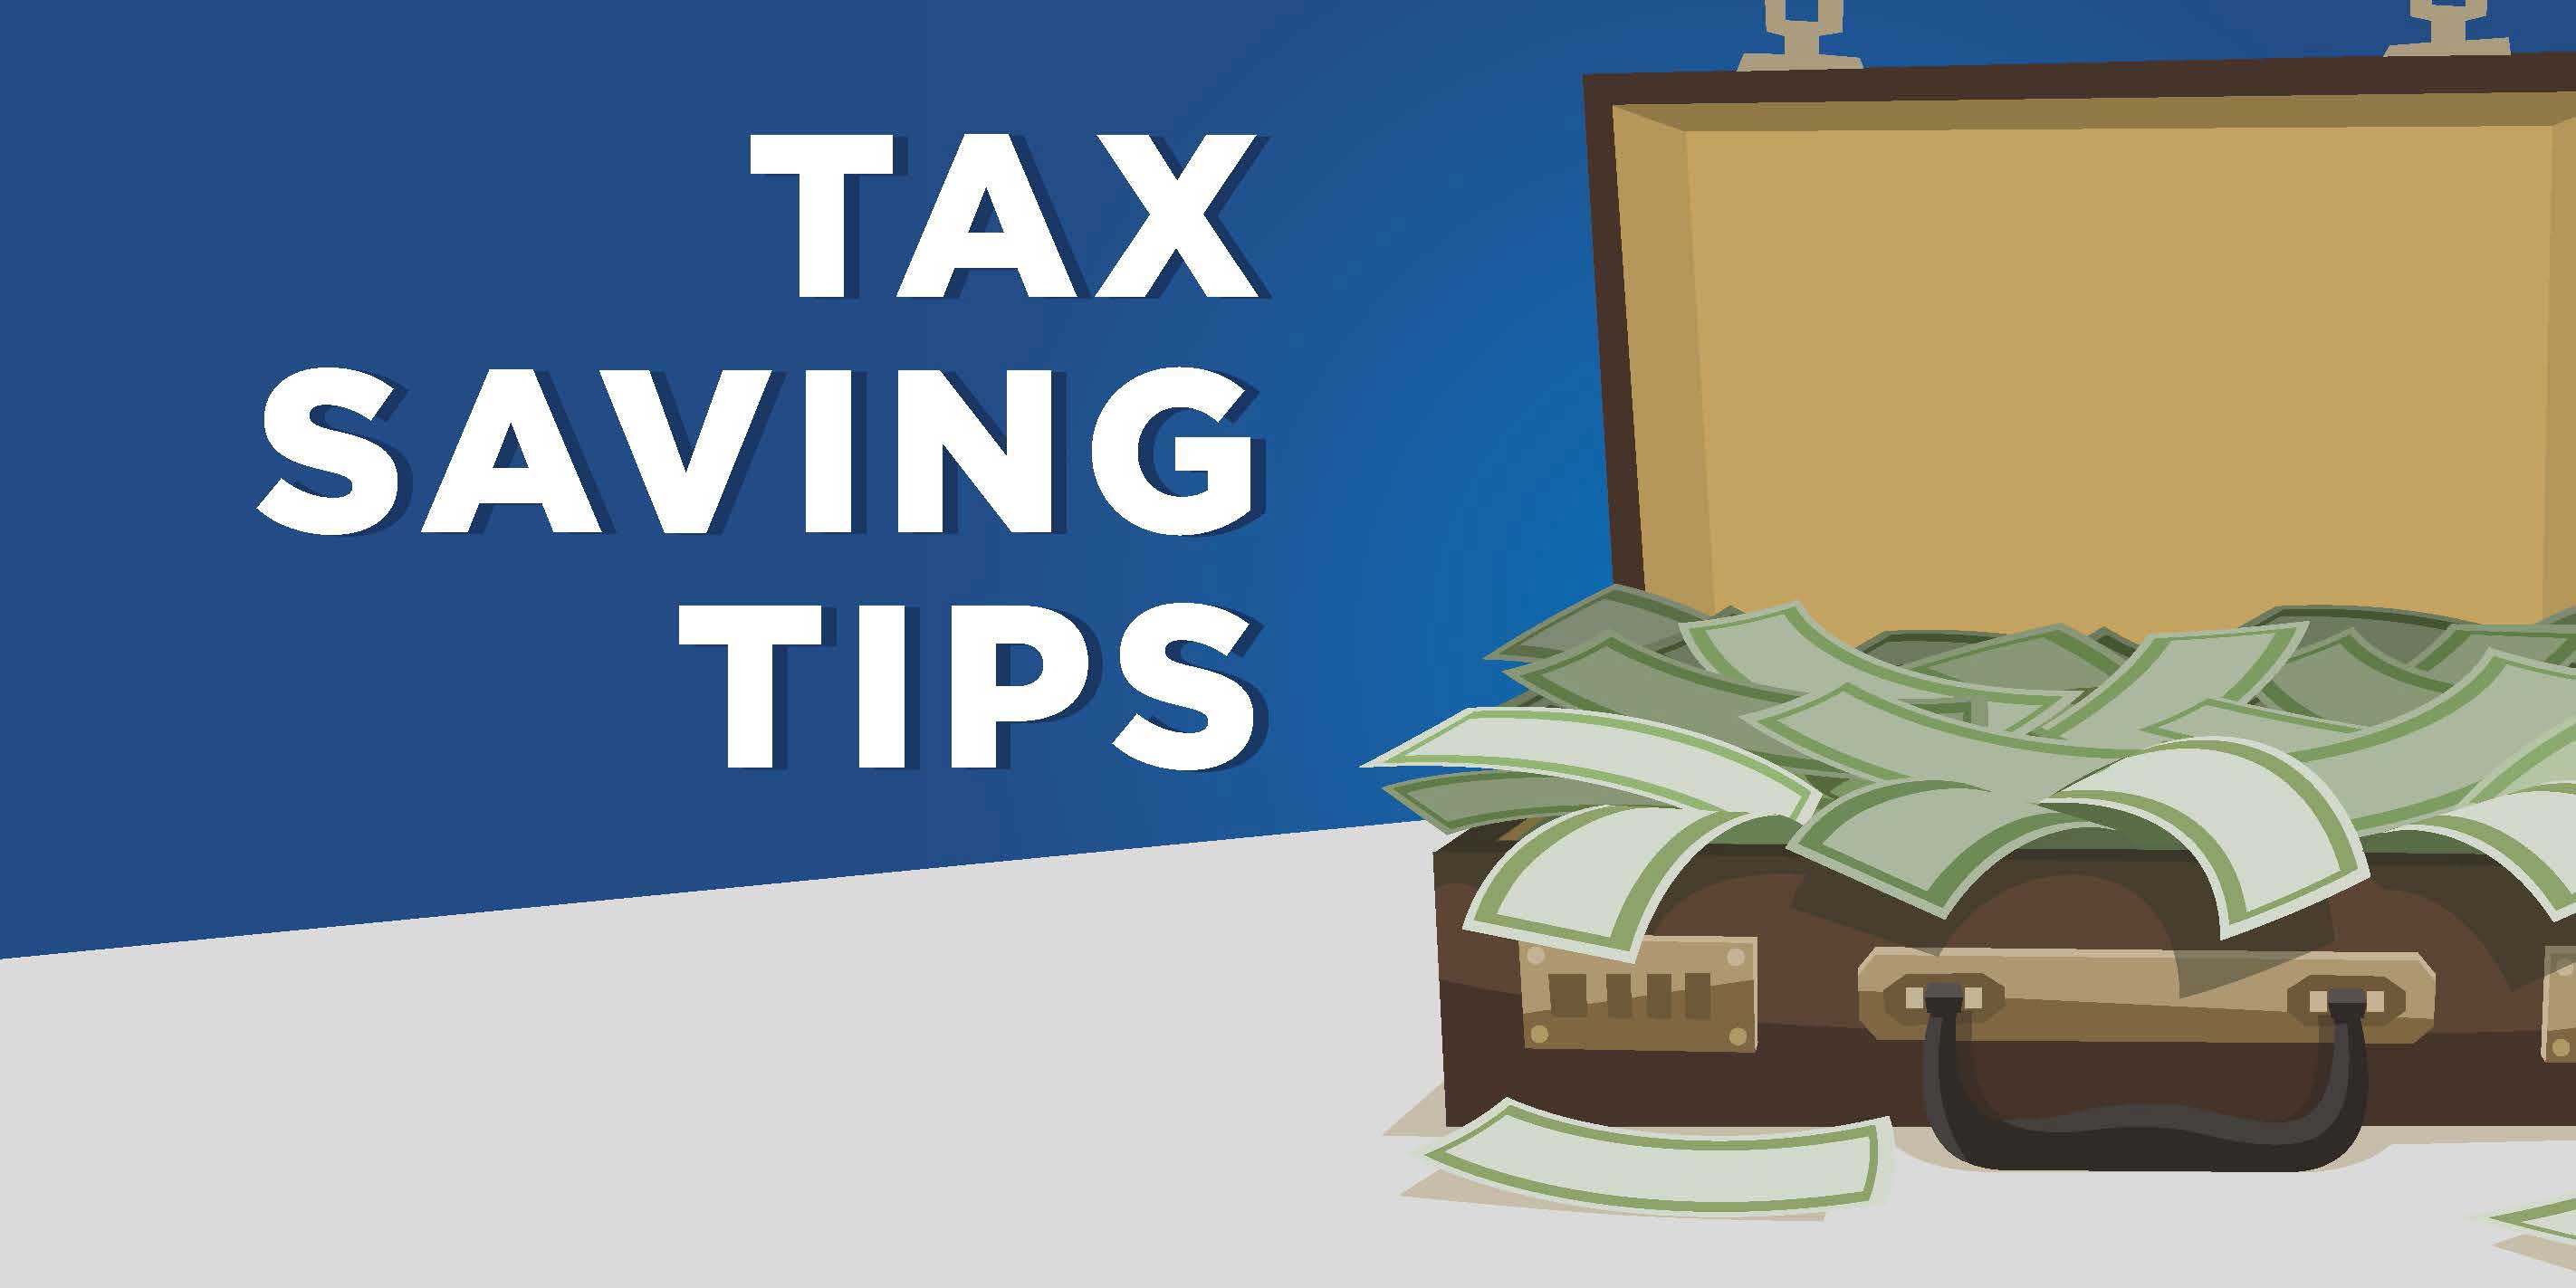 Tips to save tax who has net of over £100,000 Brayan & Spencer